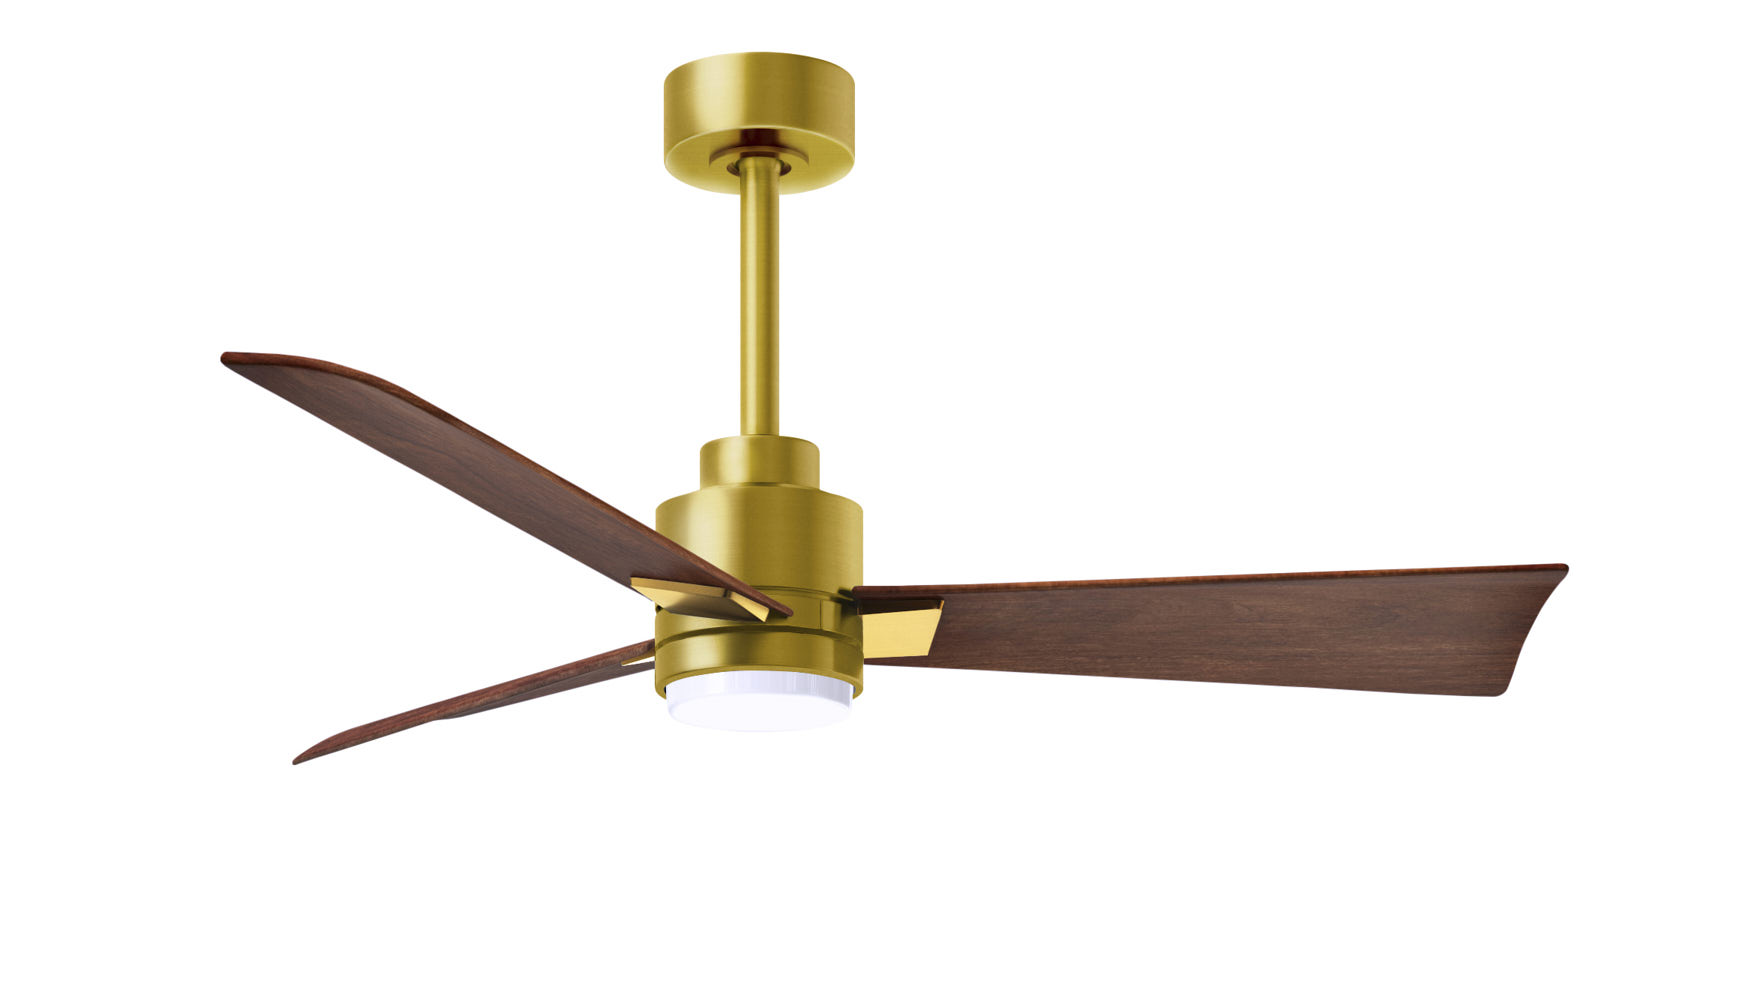 Alessandra-LK ceiling fan in brushed brass finish with 42